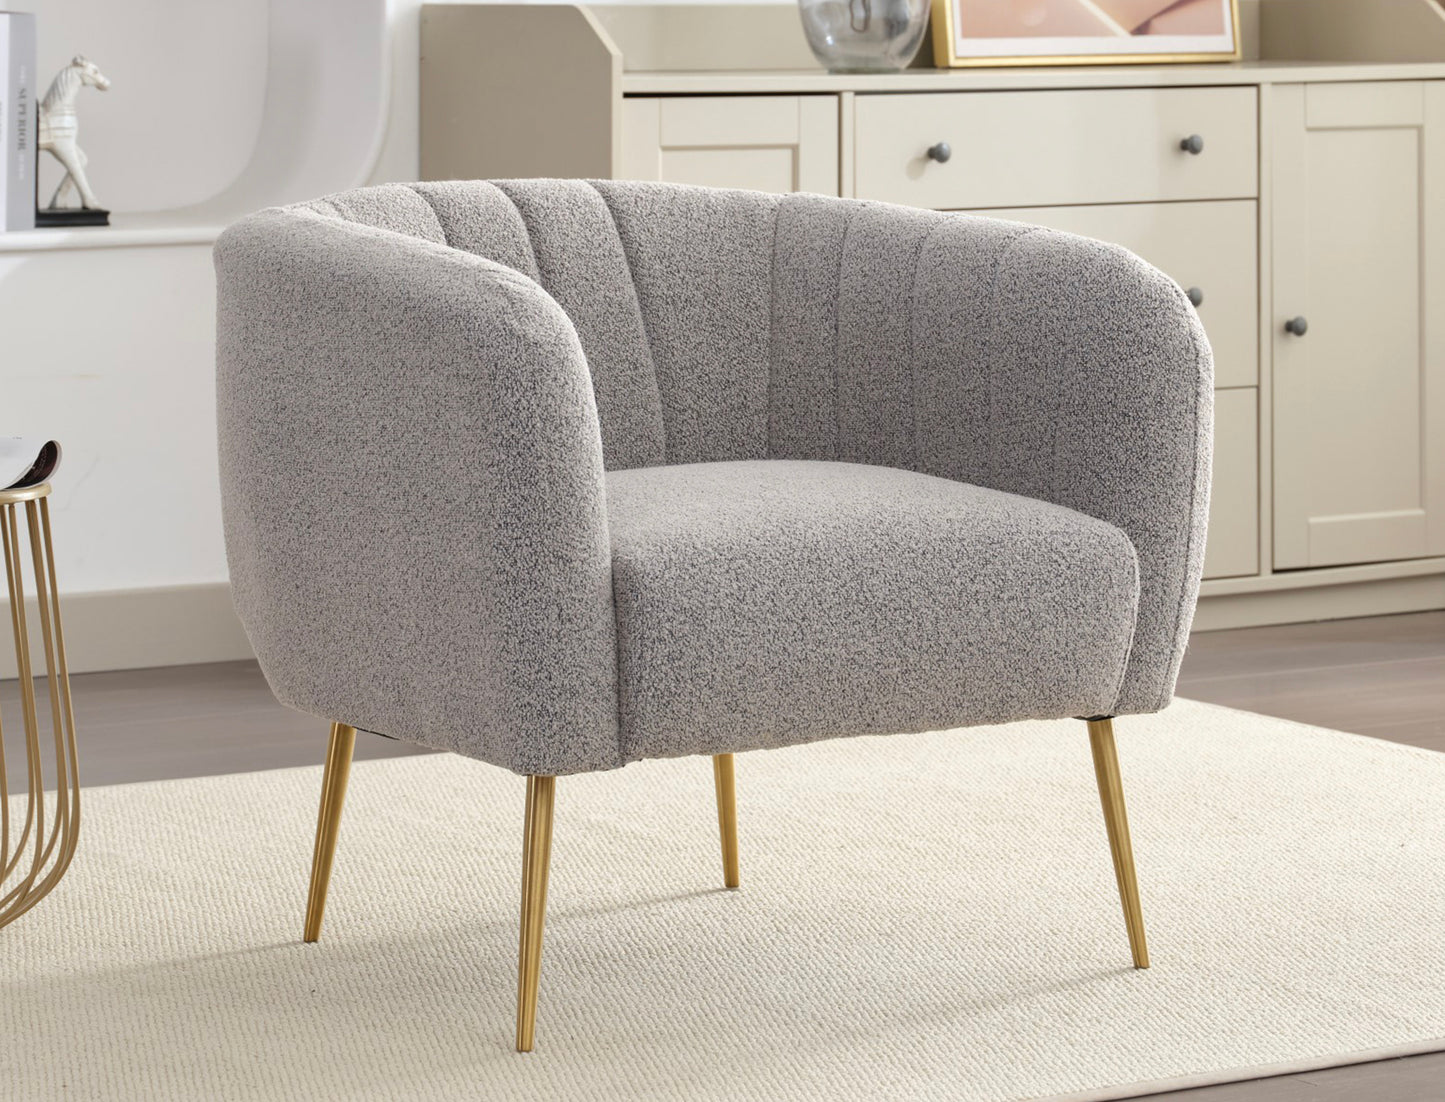 Wickham boucle fabric accent chair